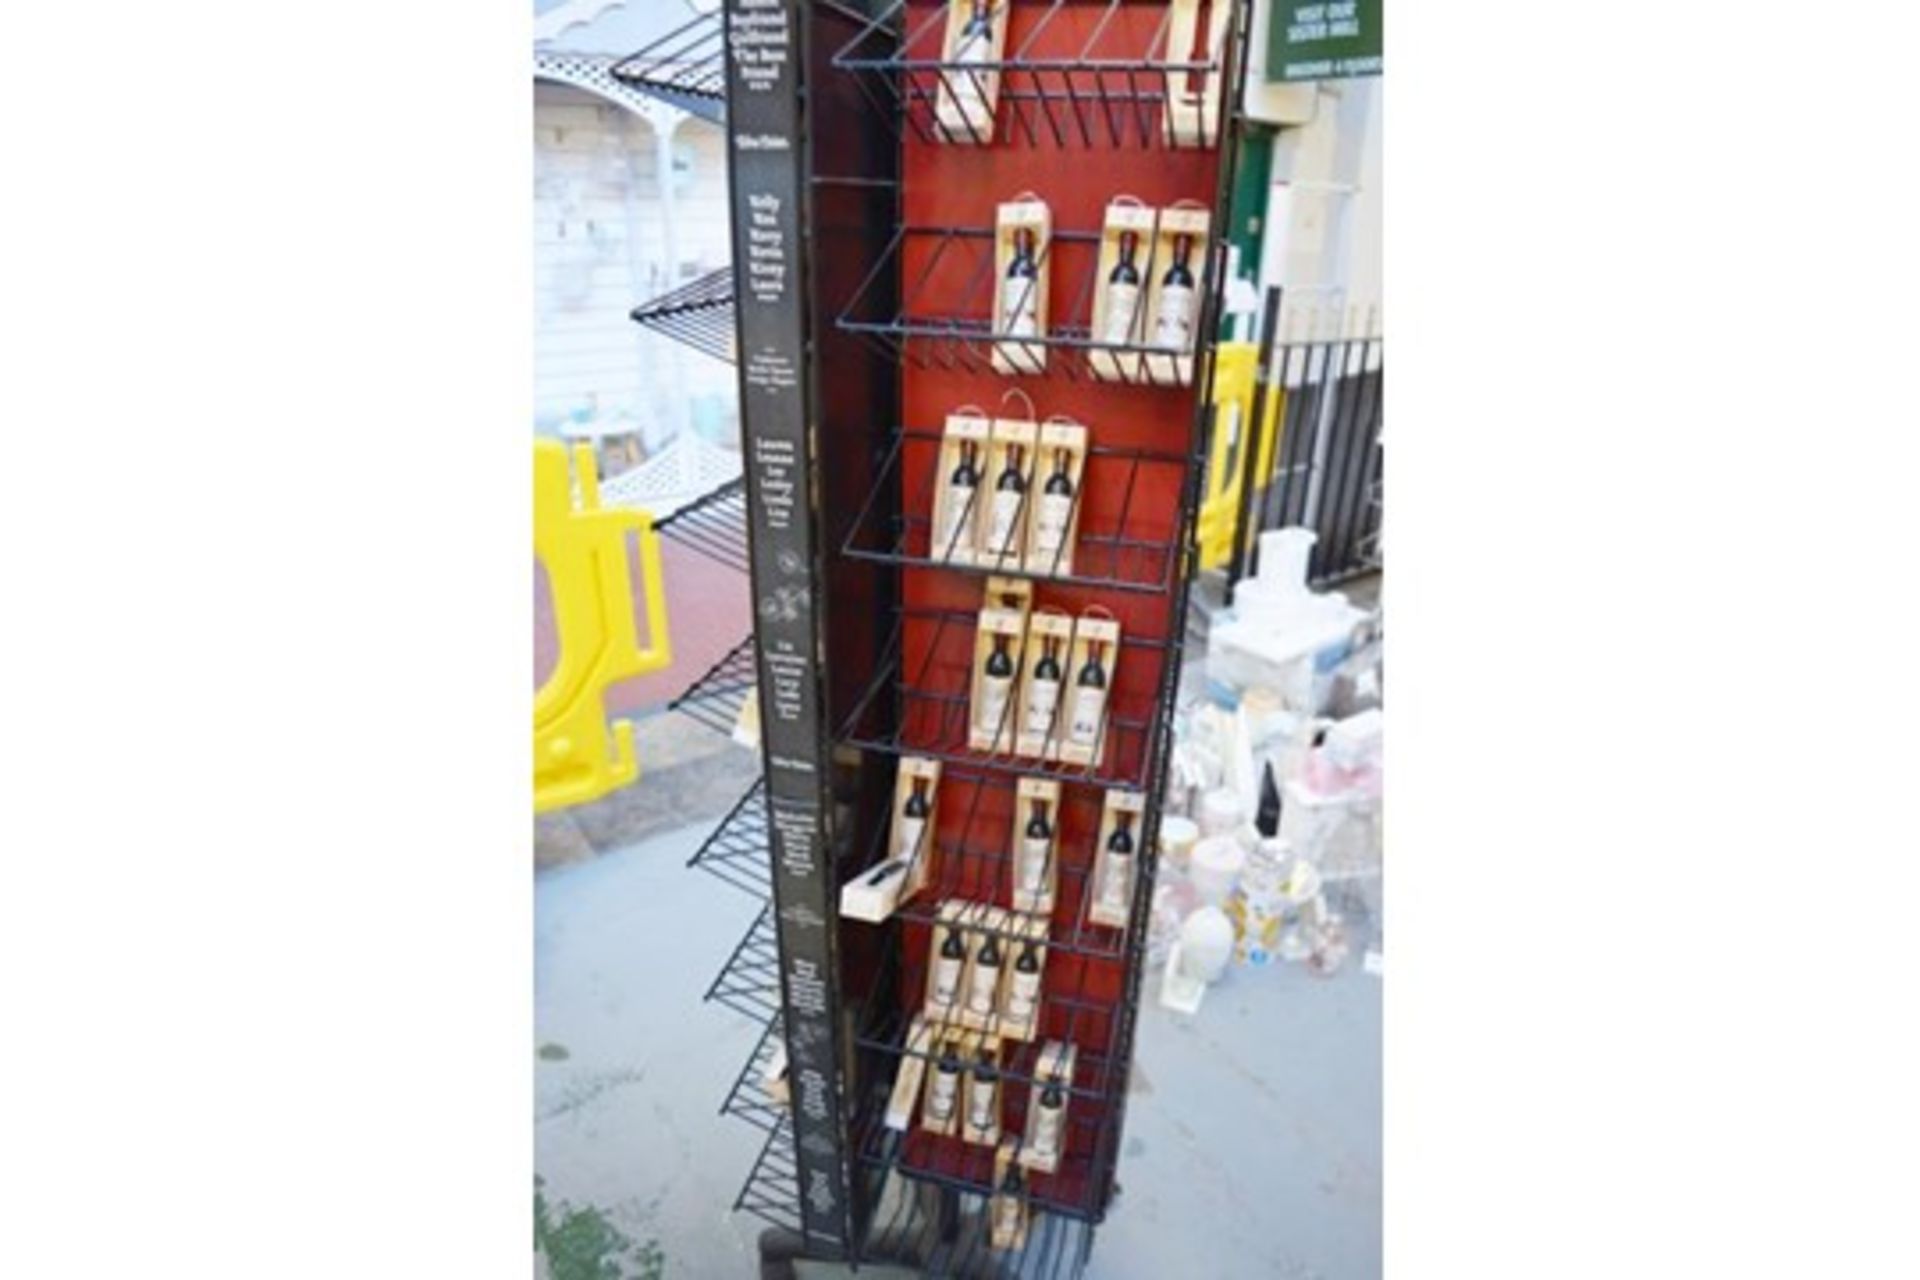 27 x Retail Carousel Display Stands With Approximately 2,800 Items of Resale Stock - Includes - Image 6 of 61